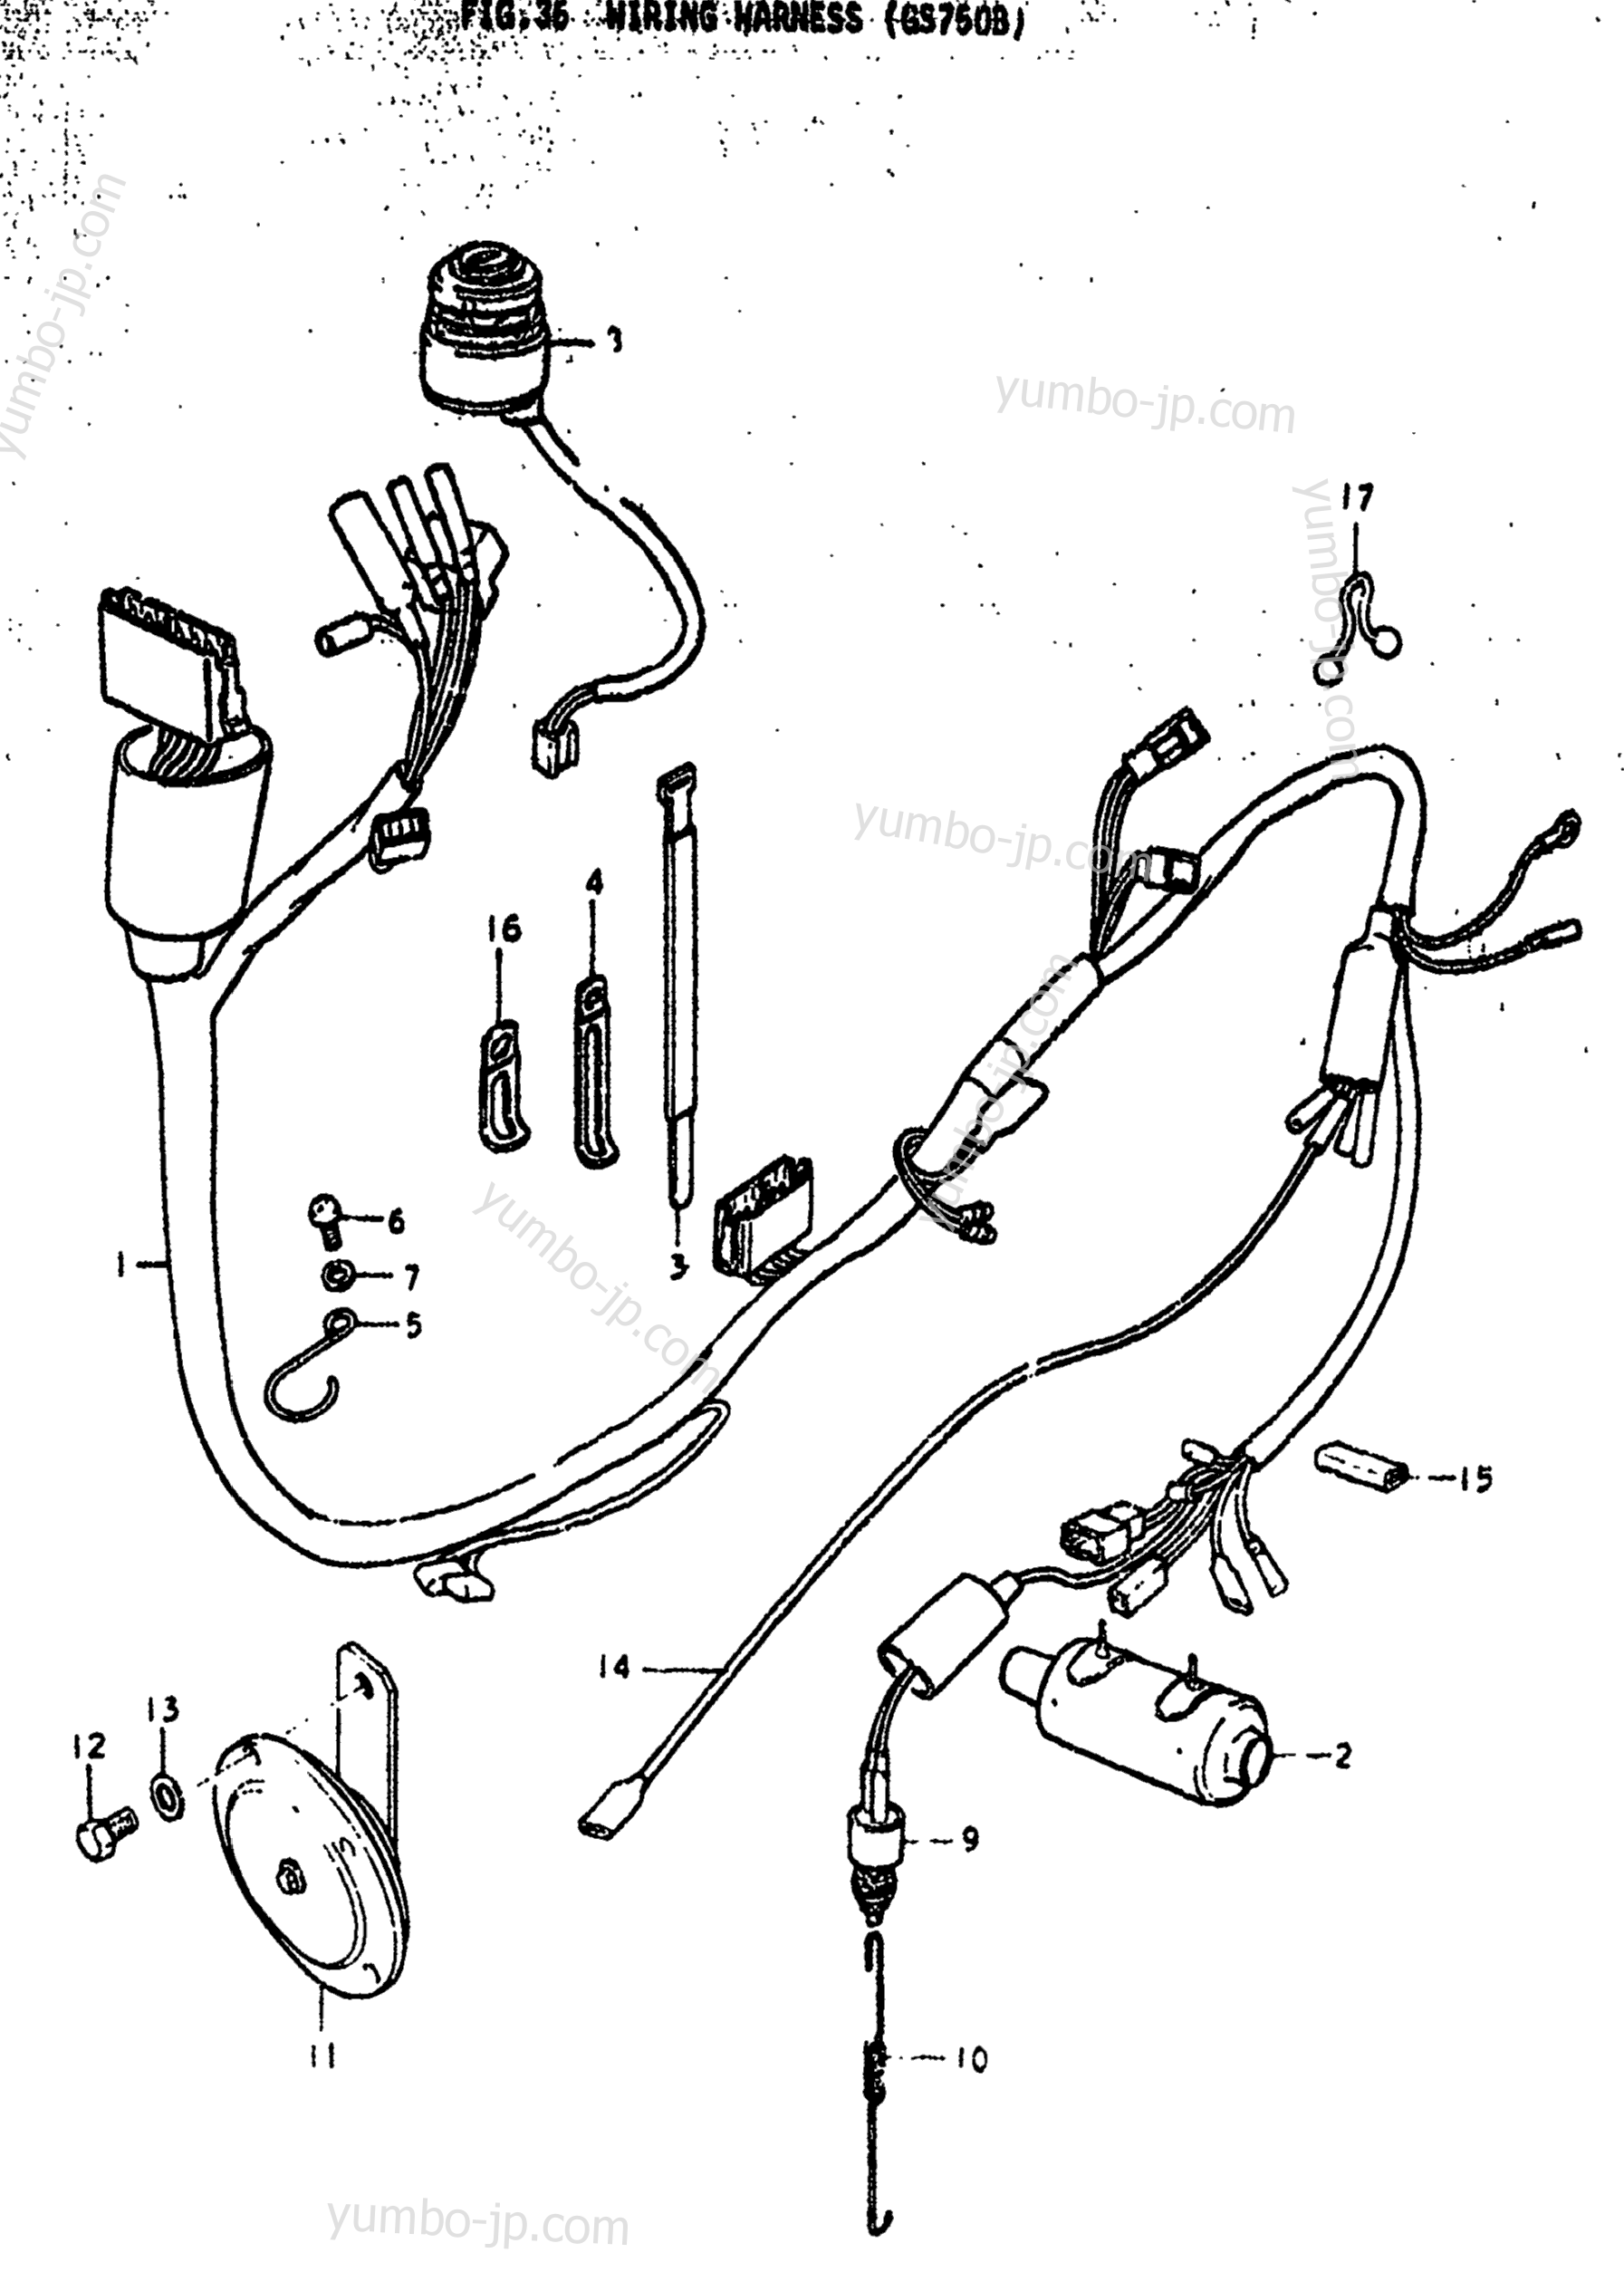 WIRING HARNESS (GS750B) for motorcycles SUZUKI GS750 1978 year